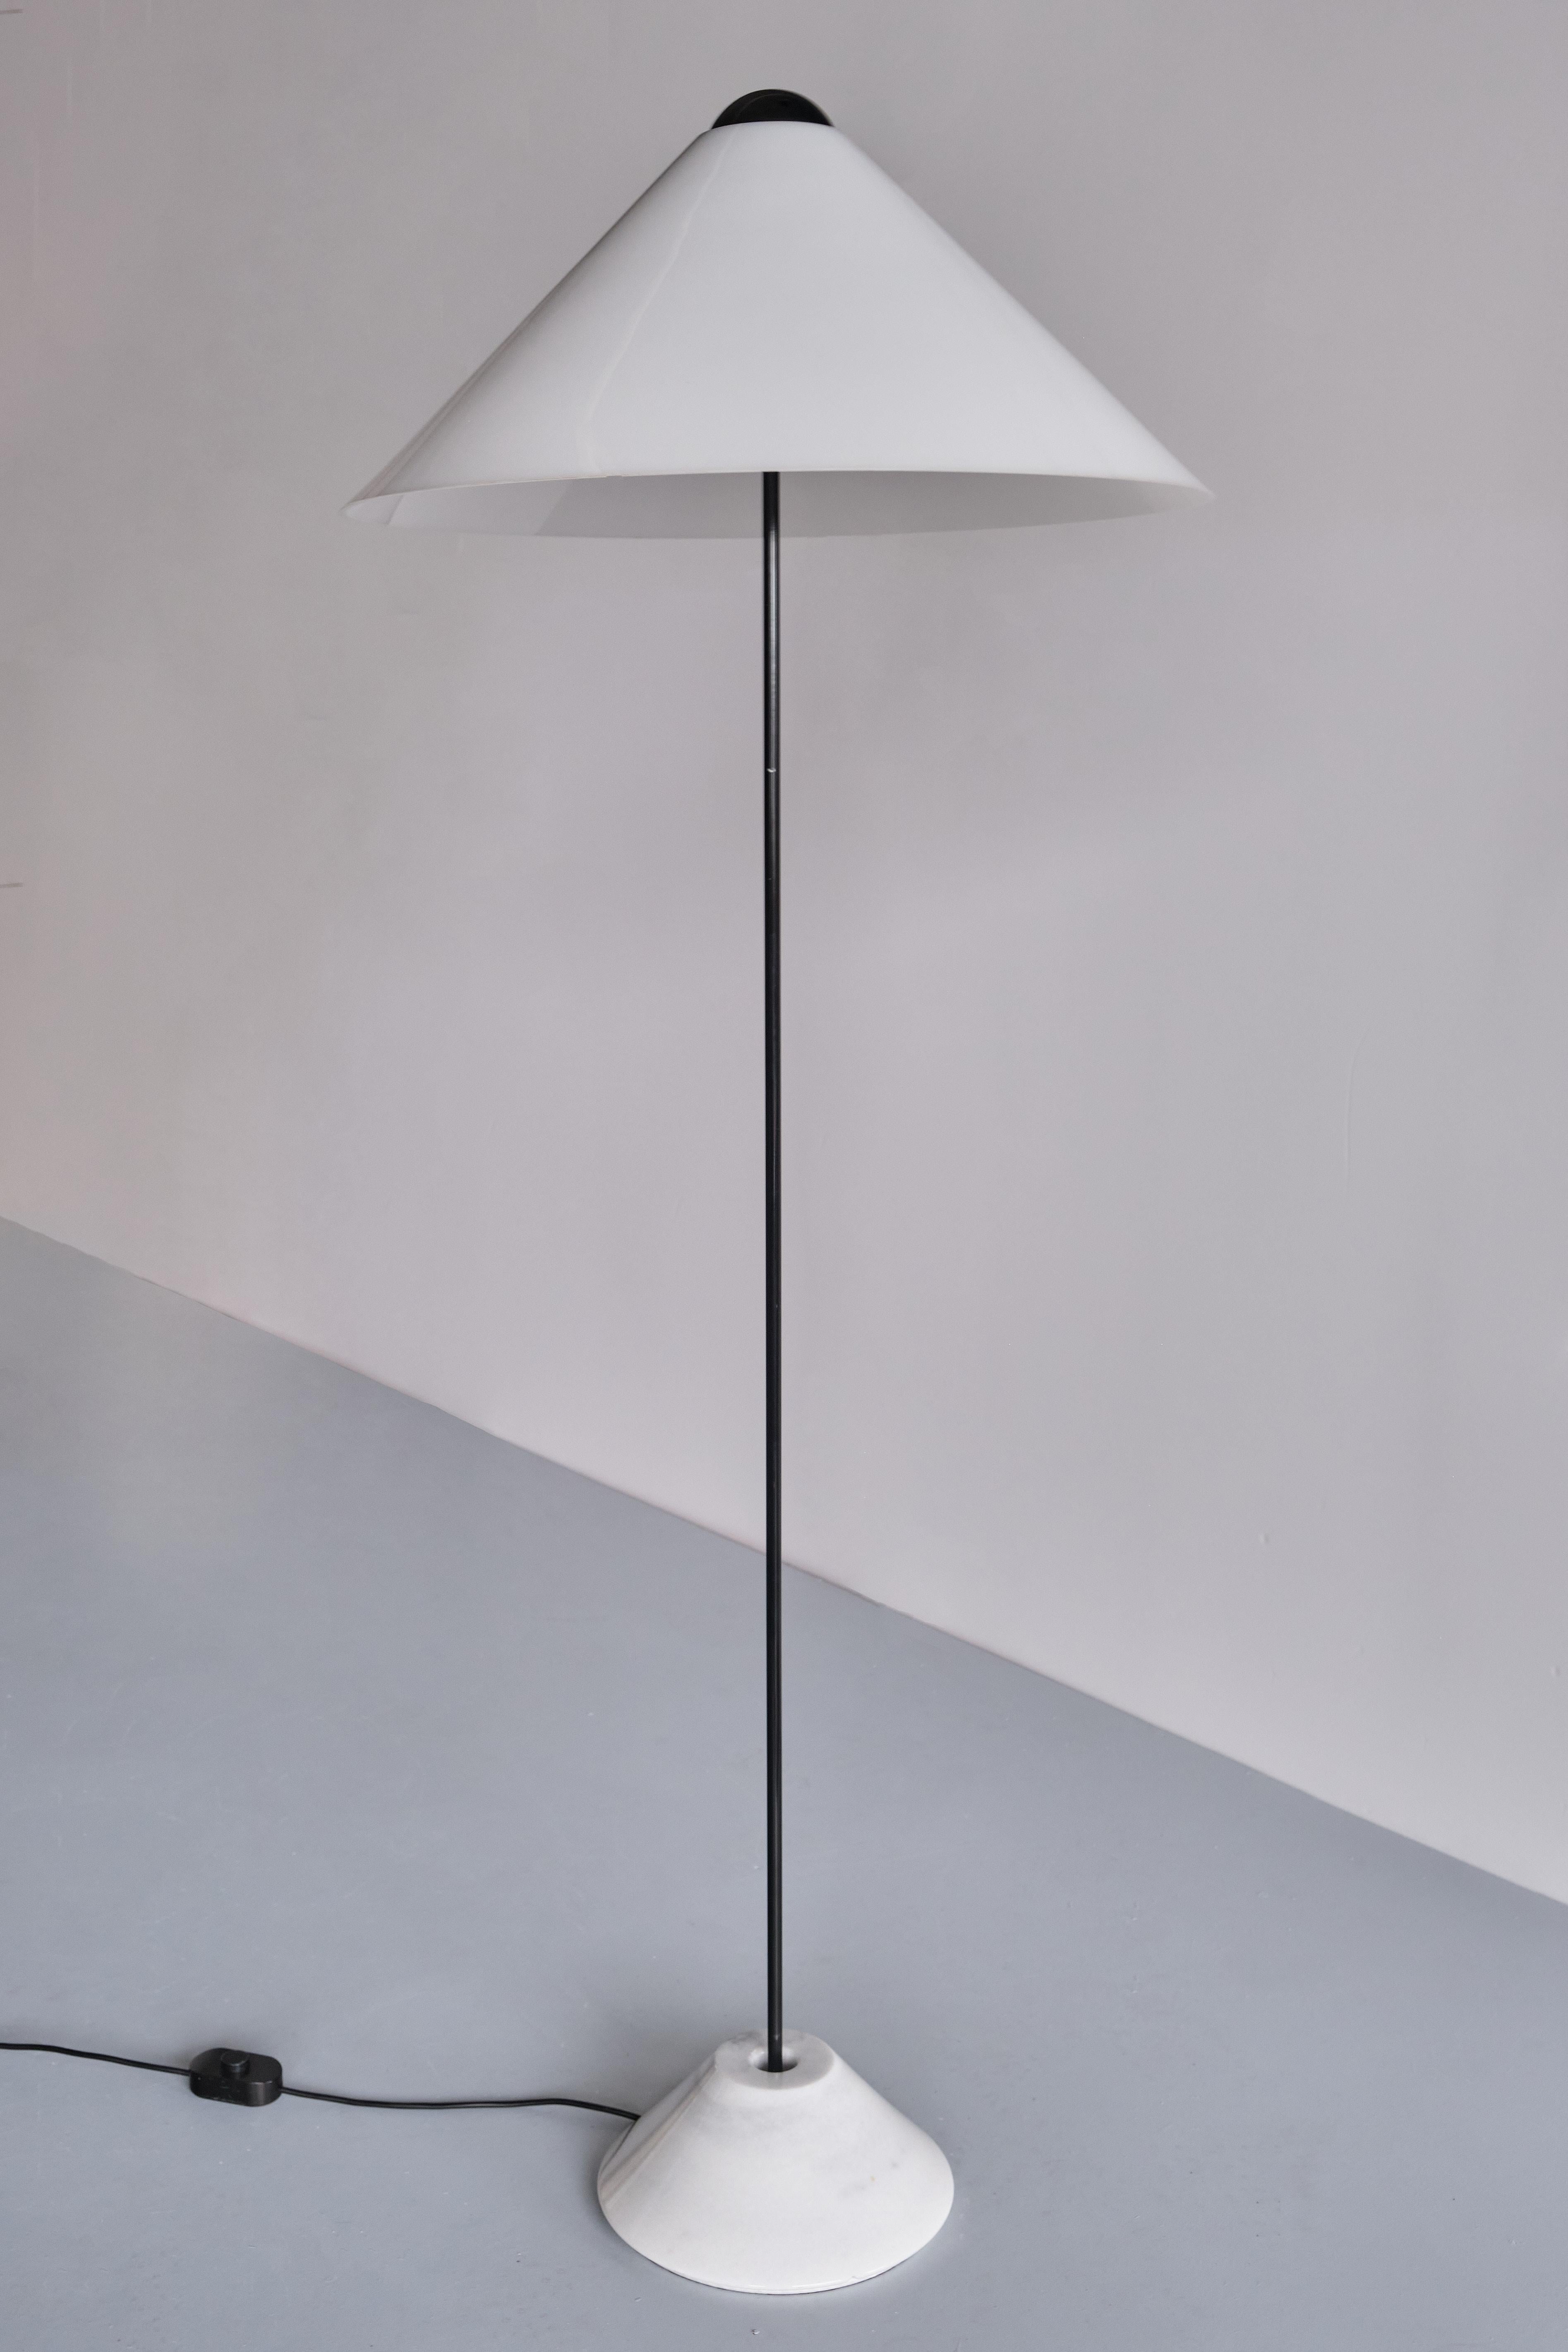 Late 20th Century Vico Magistretti 'Snow' Floor Lamp in Metal and Marble, Oluce, Italy, 1973